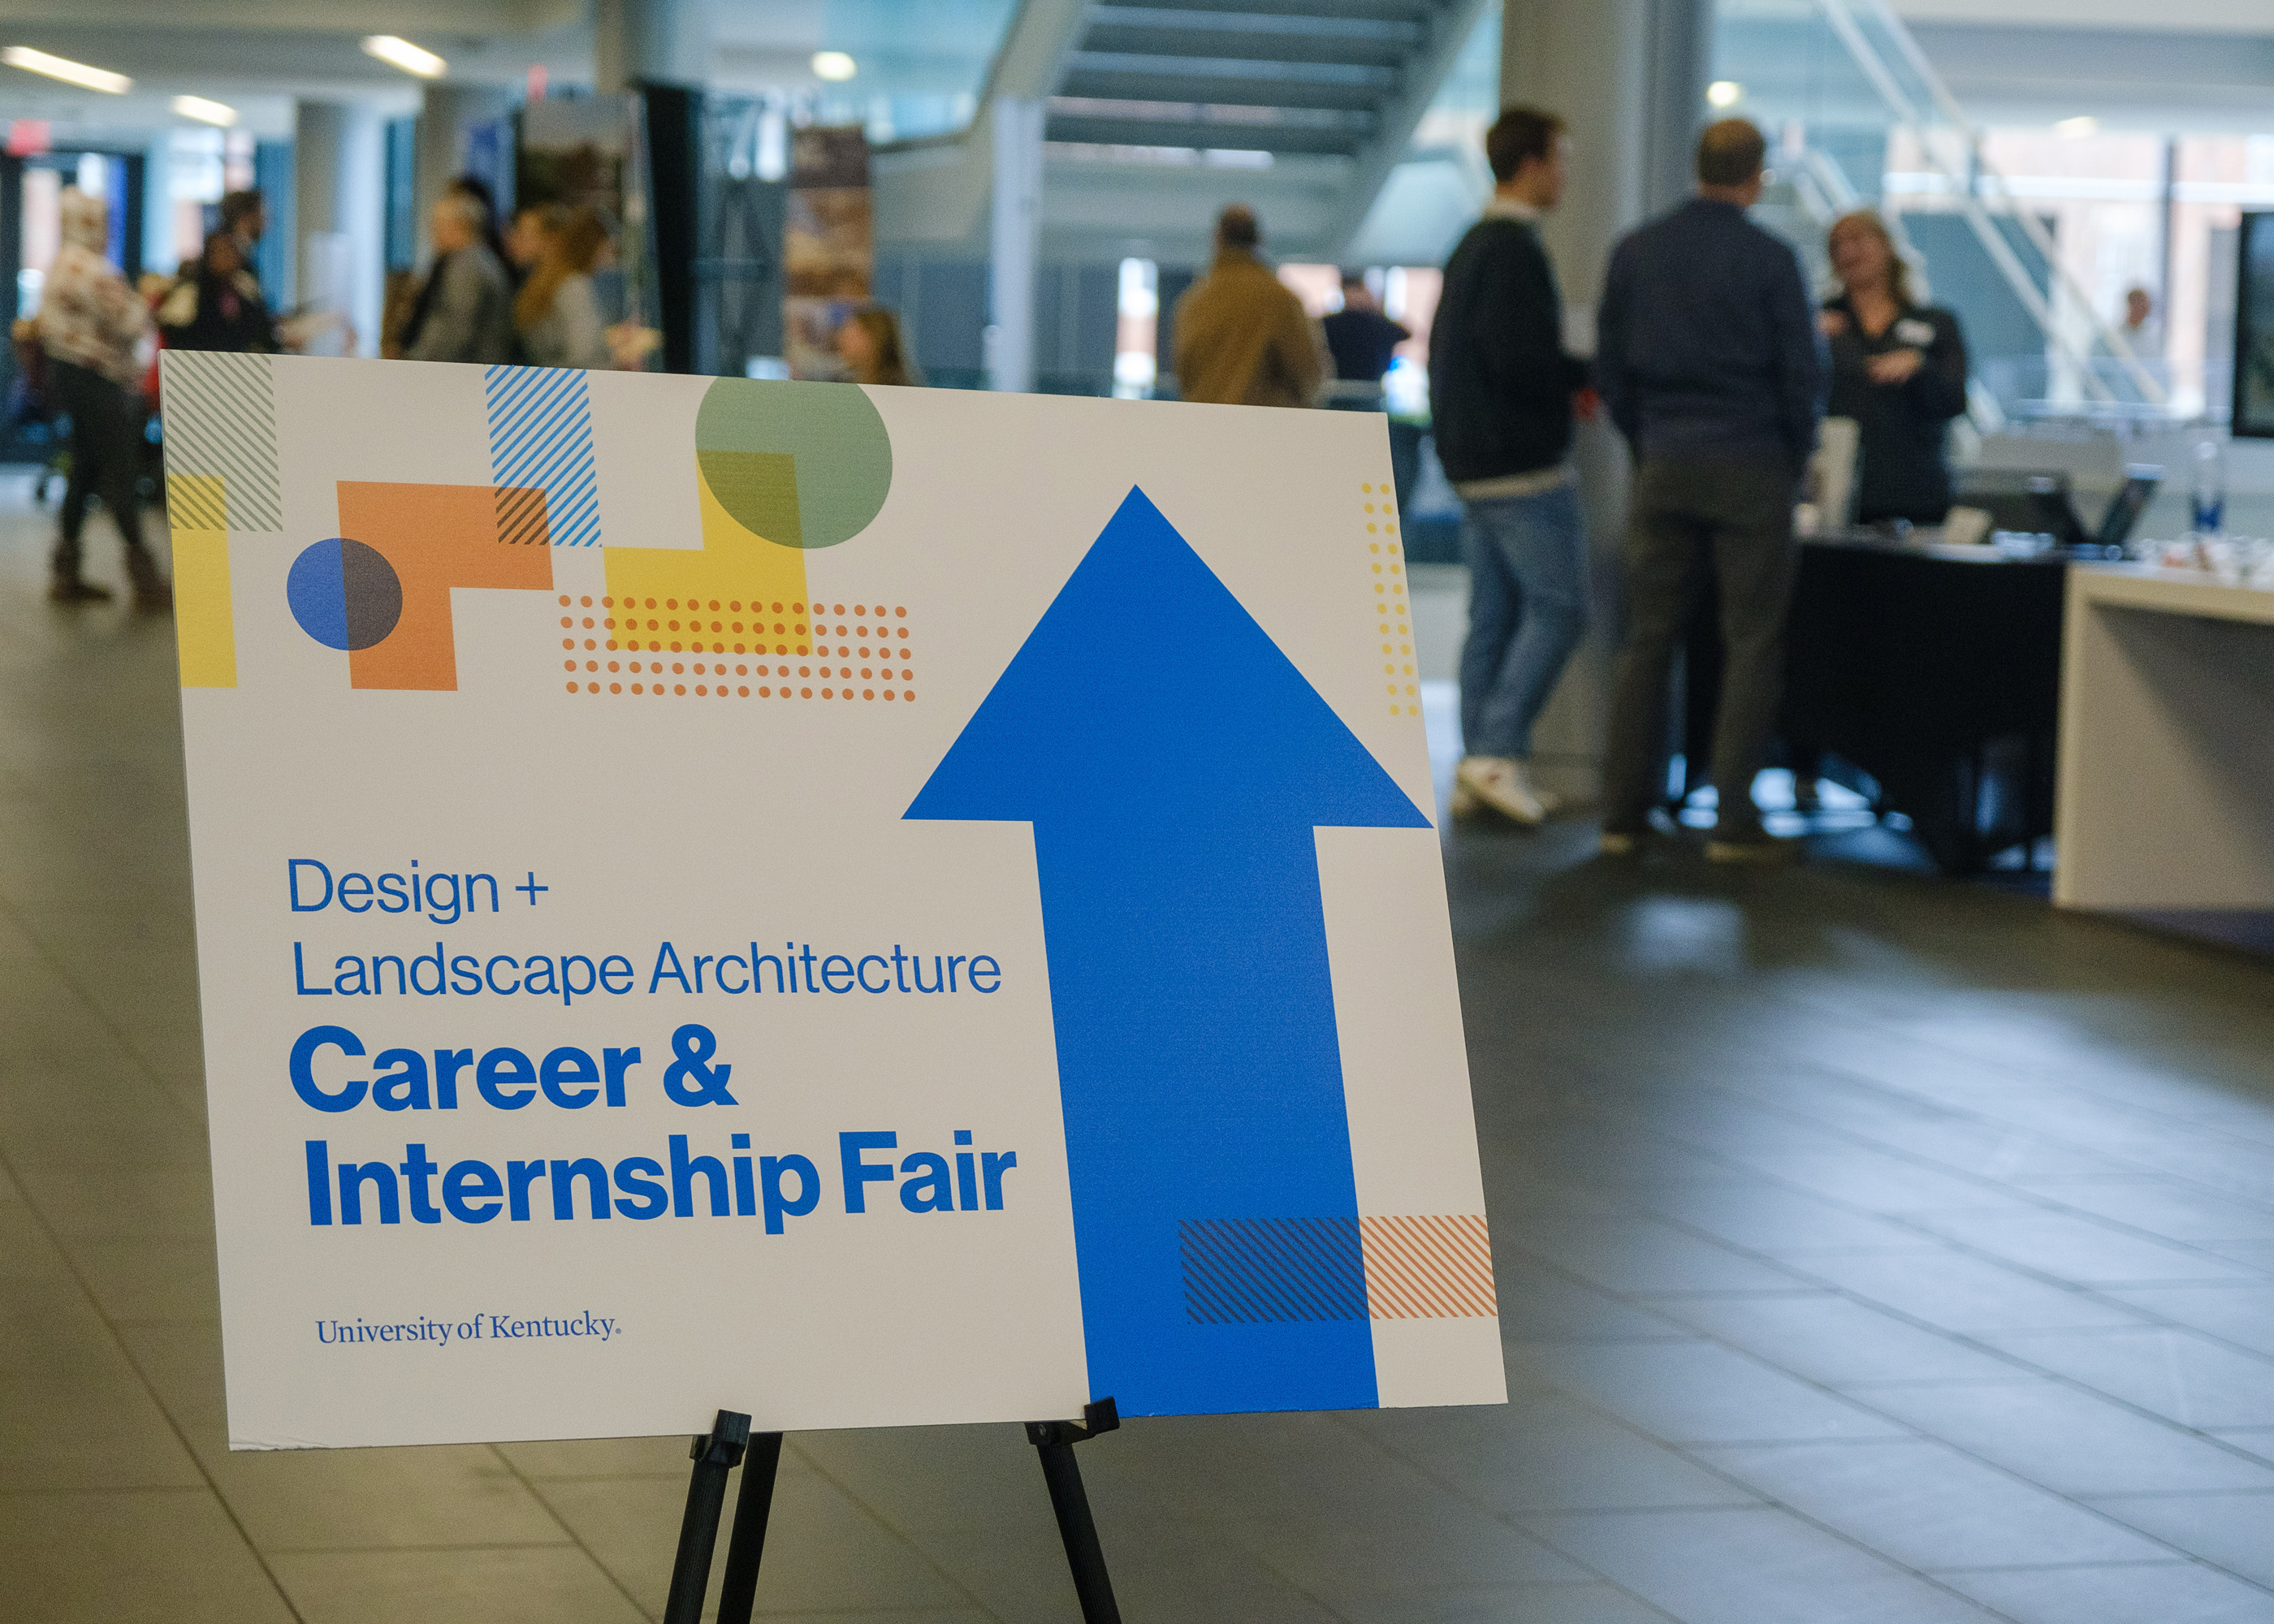 photograph of signage for the Design and Landscape Architecture Career and Internship Fair